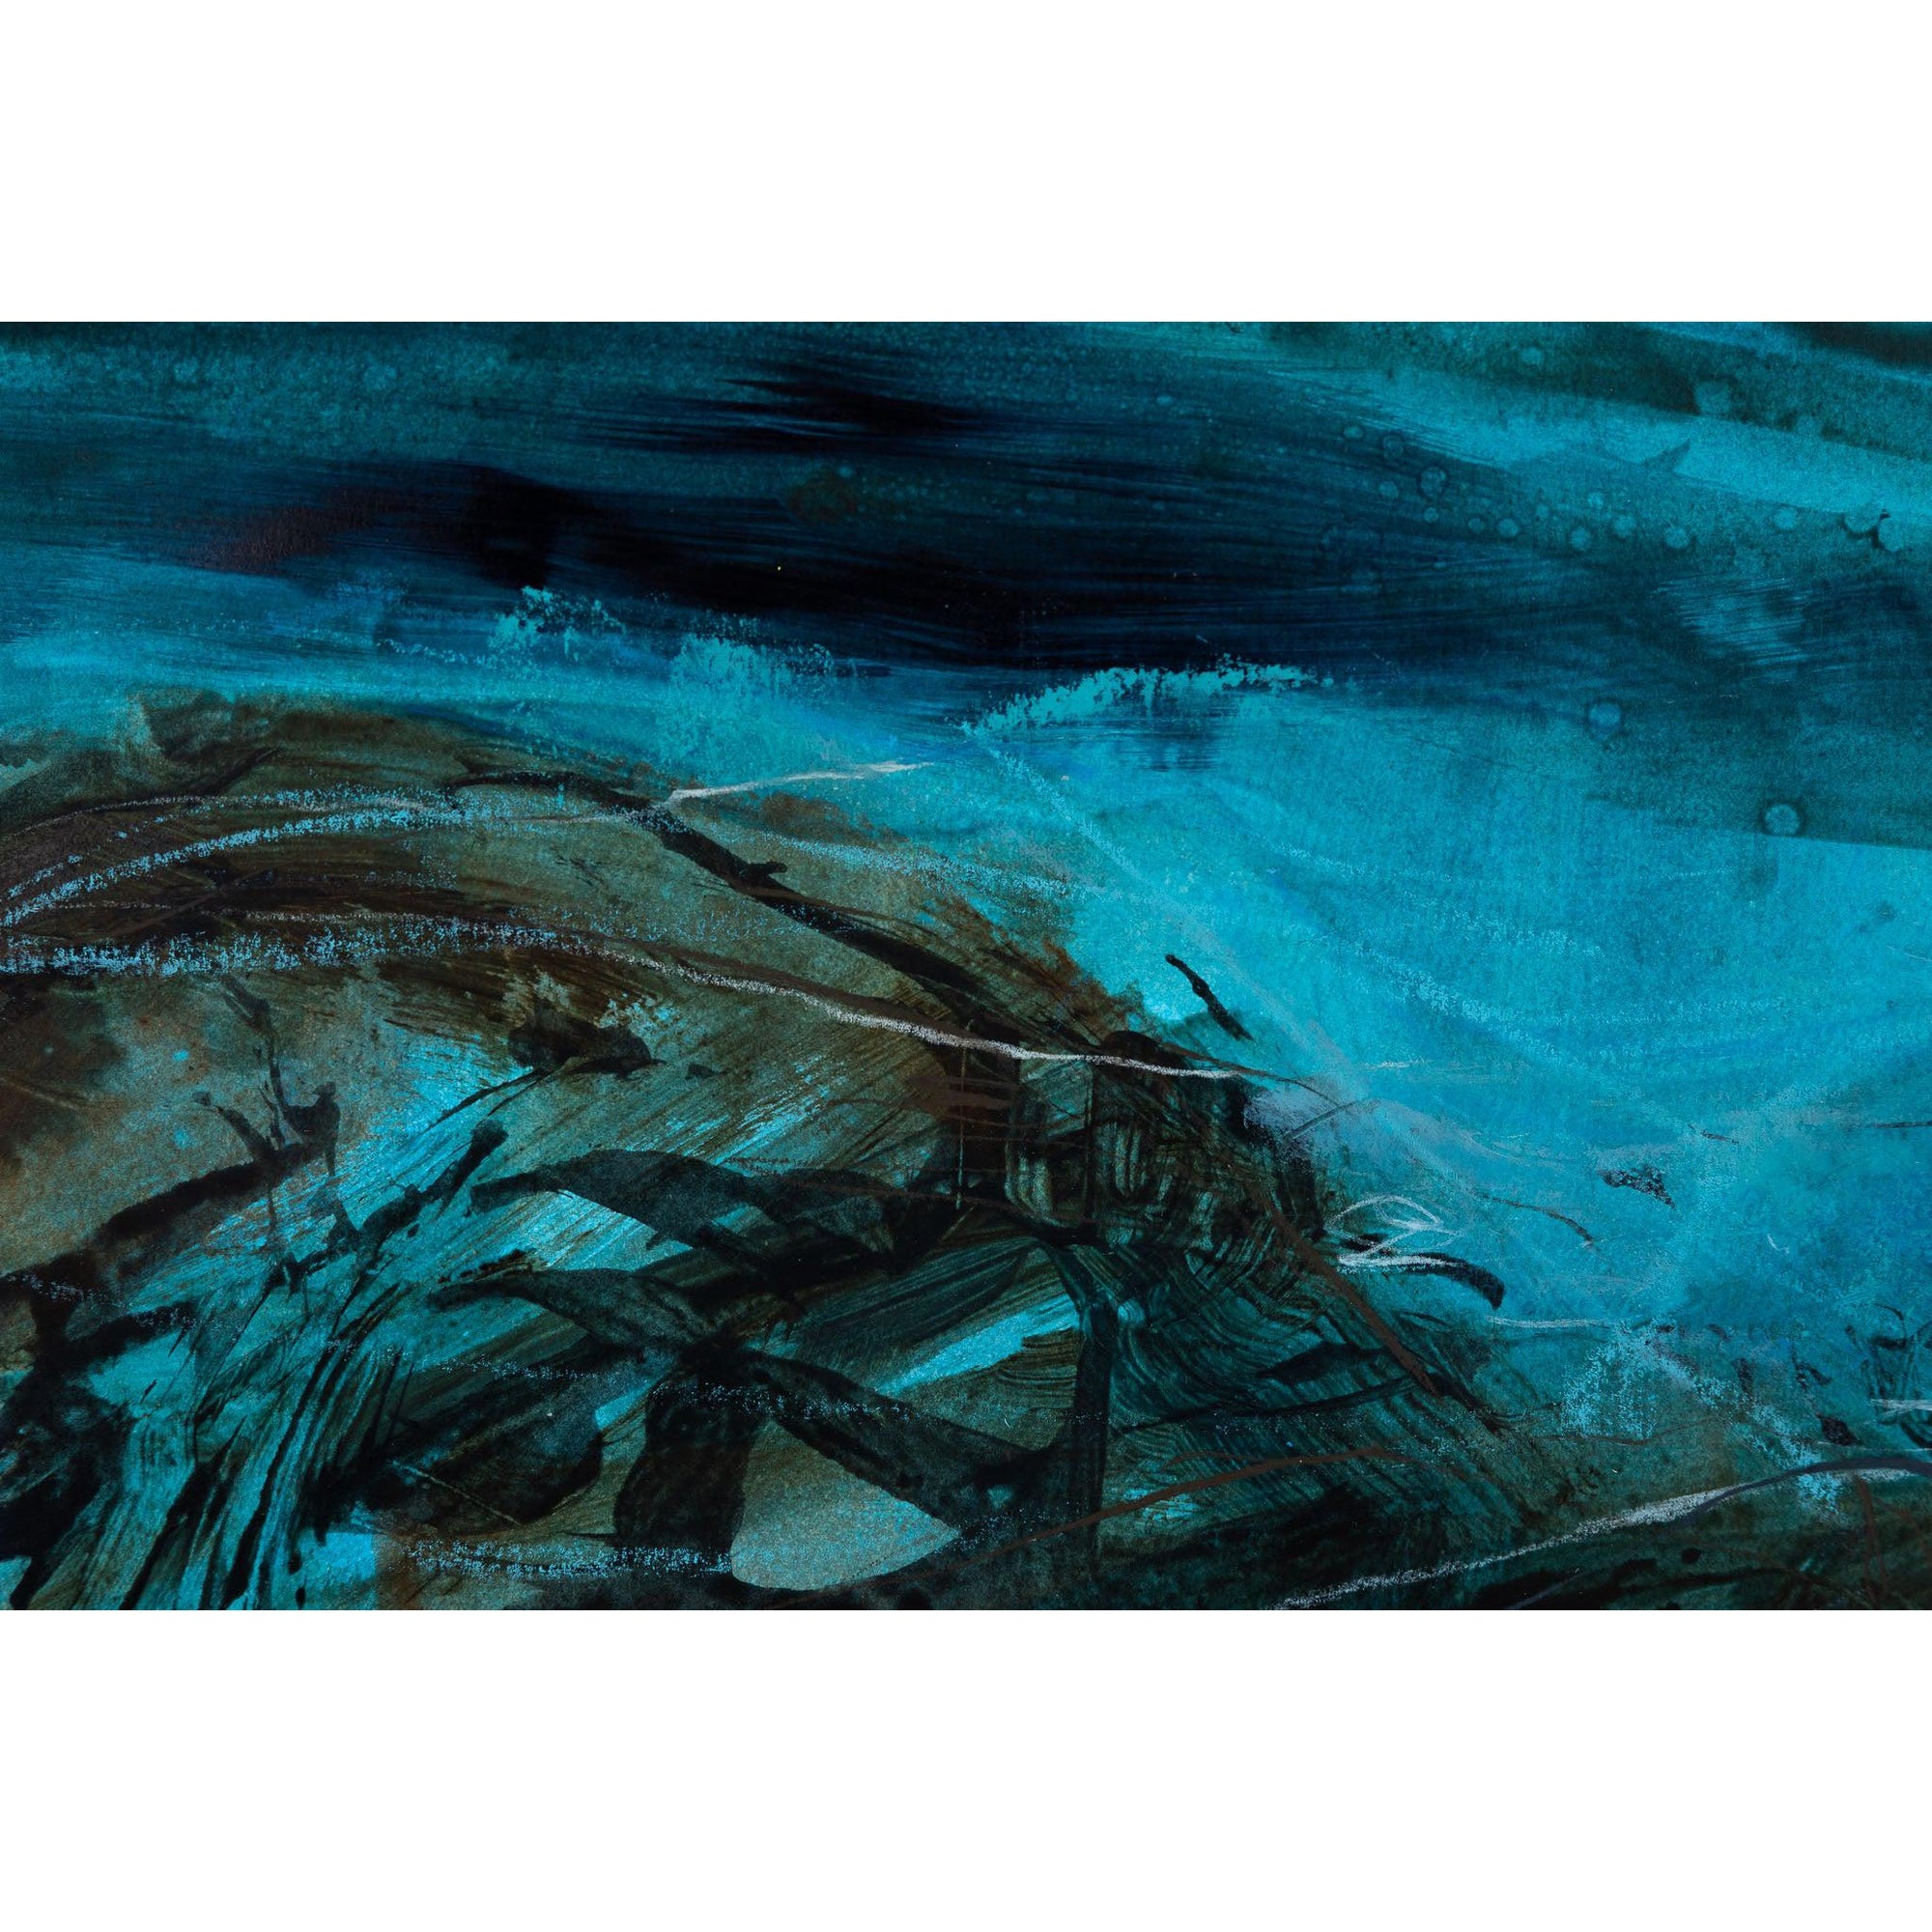 Submerging mixed media original by Jo Ellis, available at Padstow Gallery, Cornwall